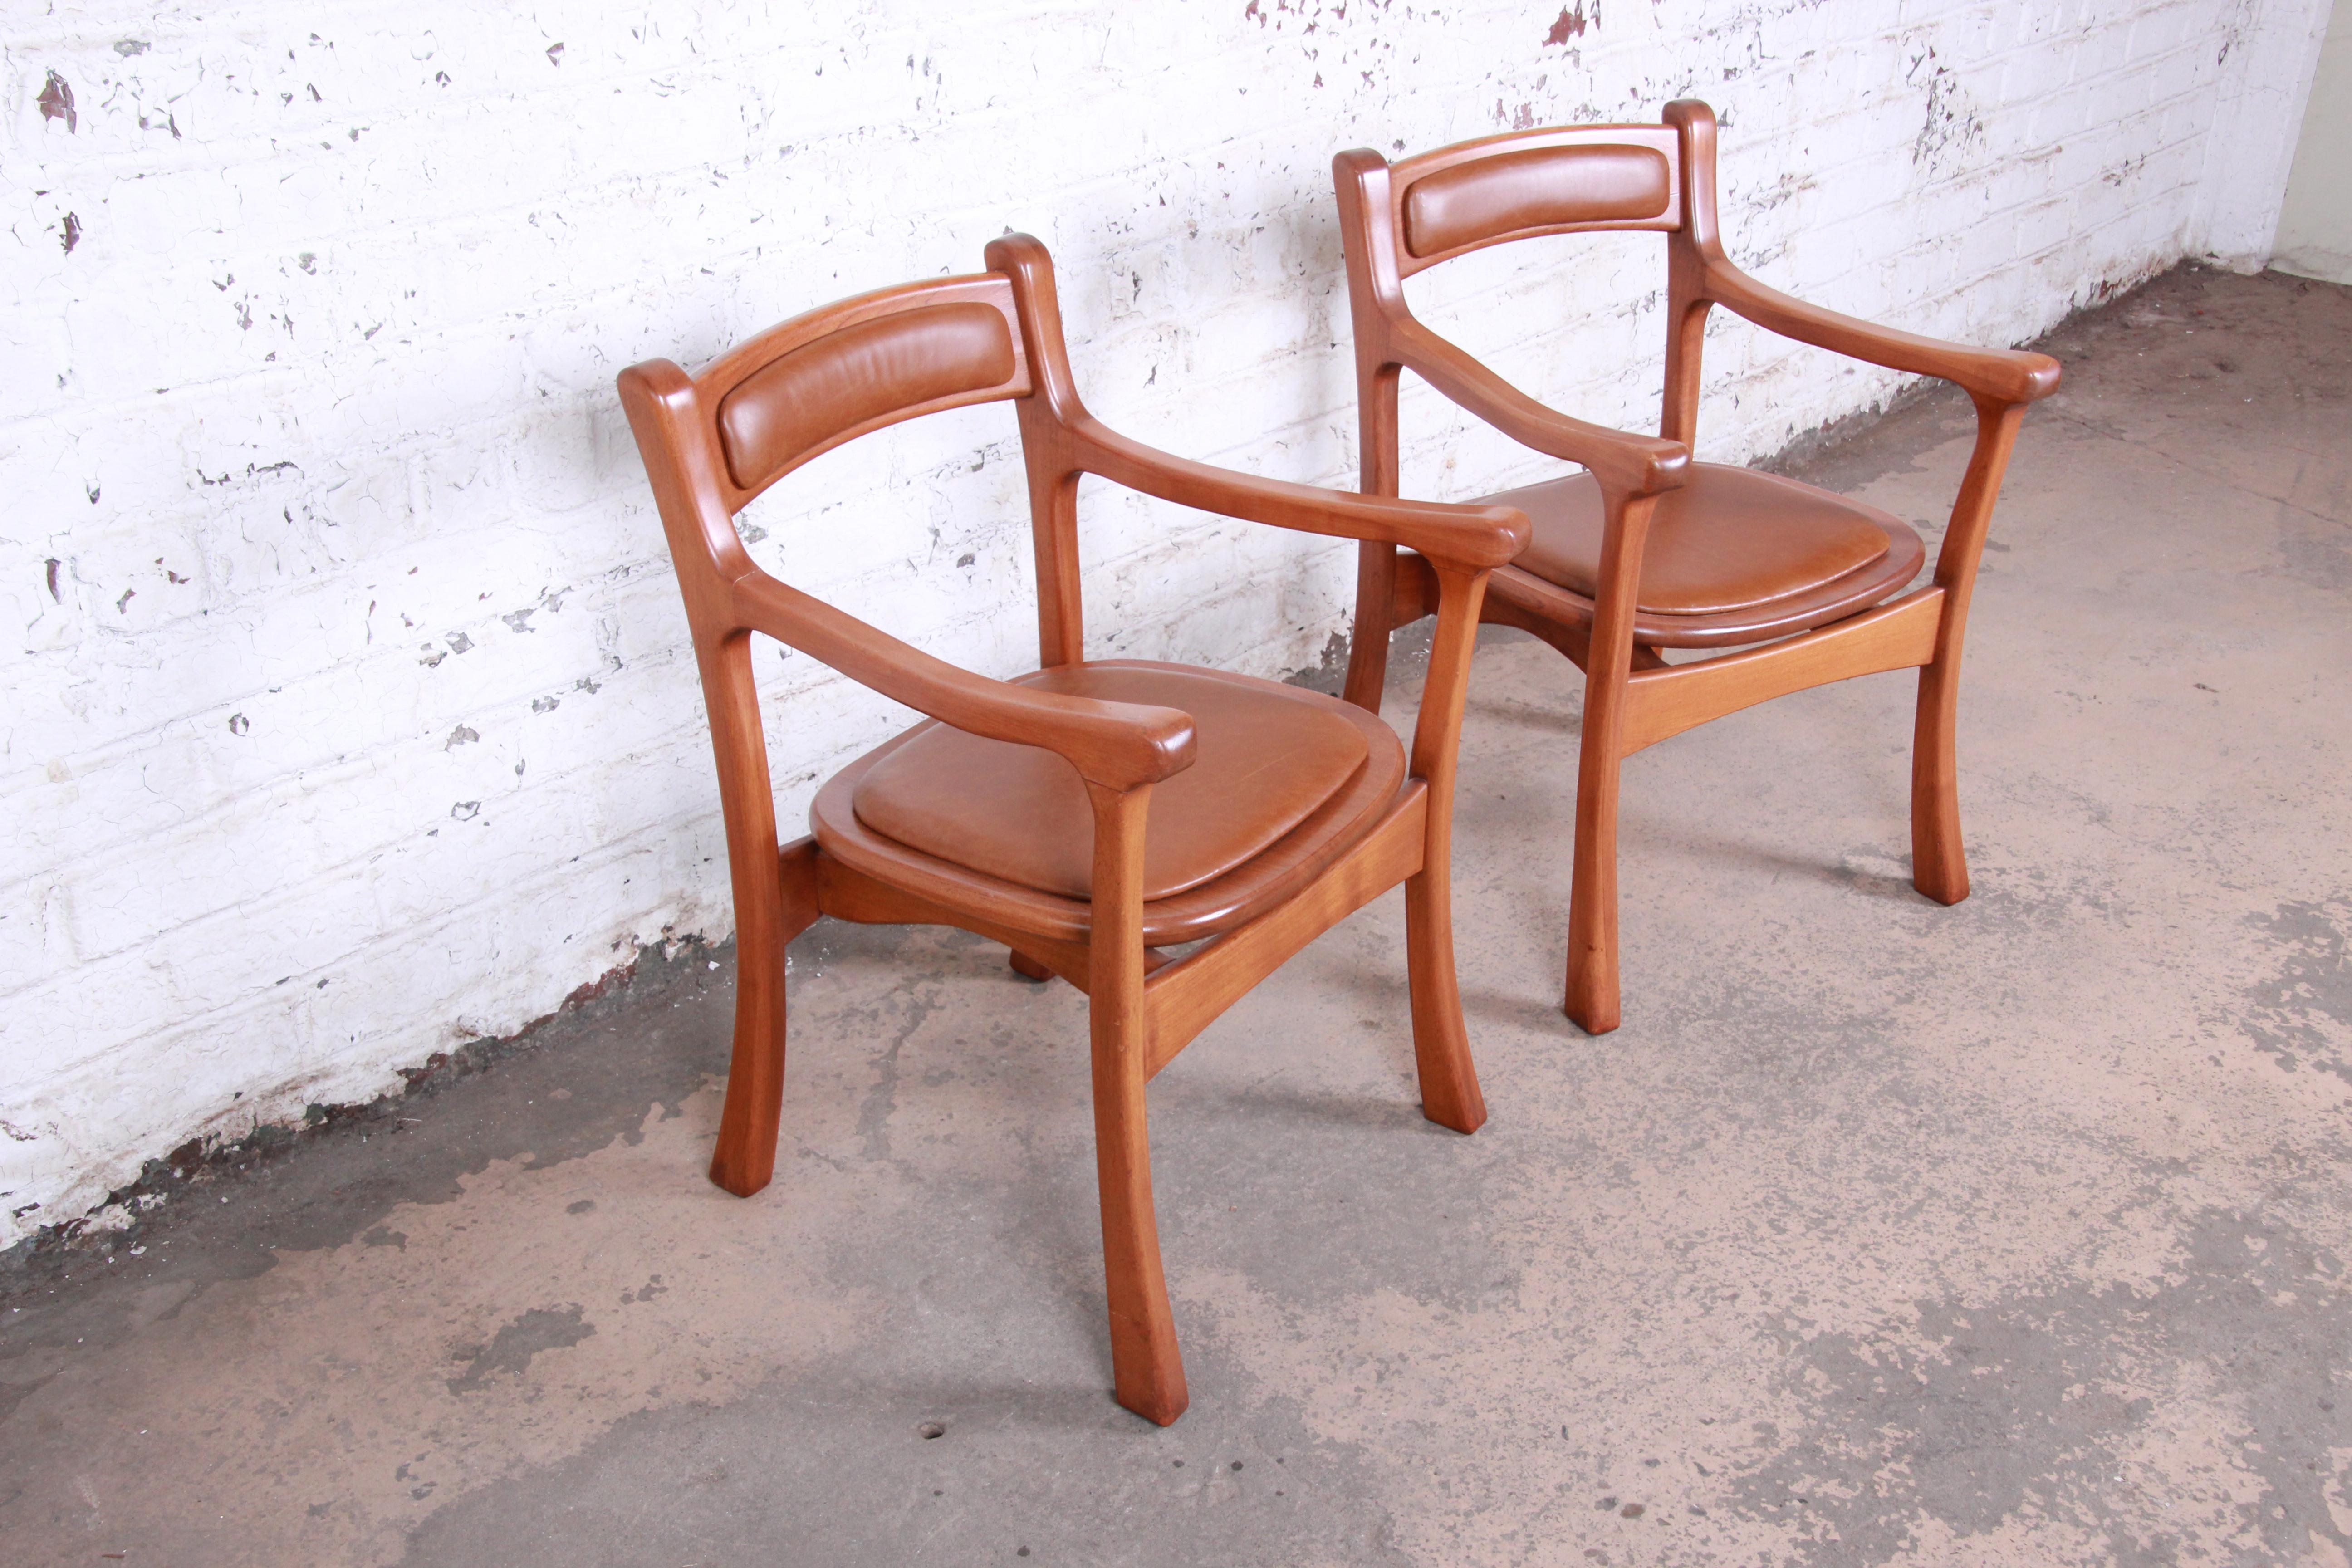 Scandinavian Modern Sculpted Solid Teak and Leather Studio Crafted Club Chairs, circa 1960s For Sale